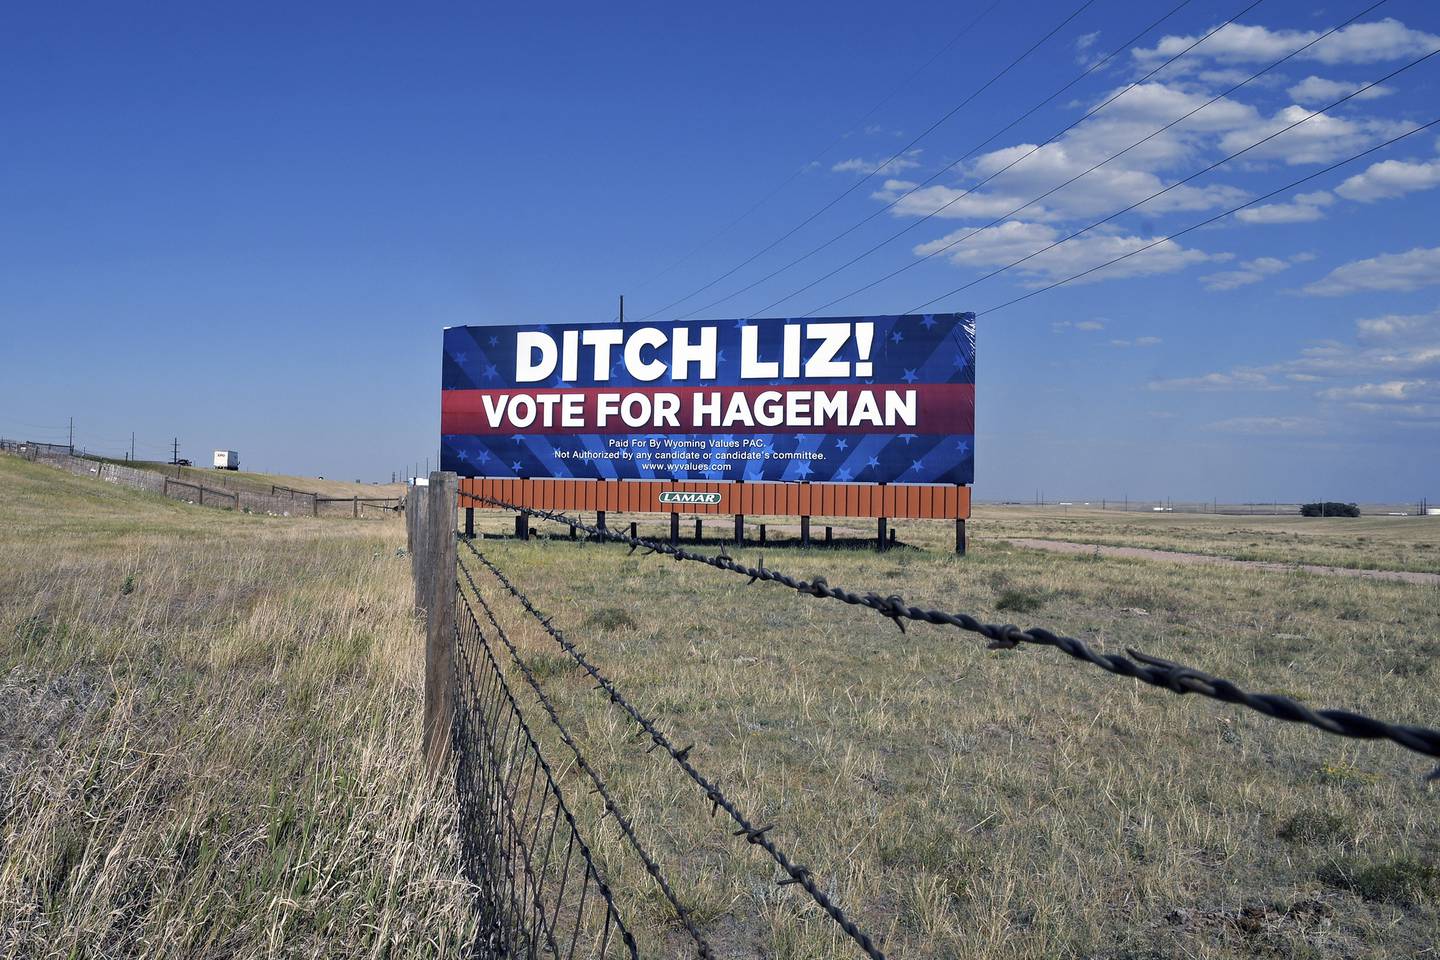 A billboard outside Cheyenne, Wyo., on July 19, 2022, calls on voters to cast their ballots for Harriet Hageman, who is running against incumbent Rep. Liz Cheney, R-Wyo., in the Republican primary election Aug. 16. Rep. Cheney is in the political fight of her life. Wyoming's congresswoman since 2016 is facing a Donald Trump-backed opponent, attorney Harriet Hageman, in the state's upcoming Republican primary. (AP Photo/Thomas Peipert)